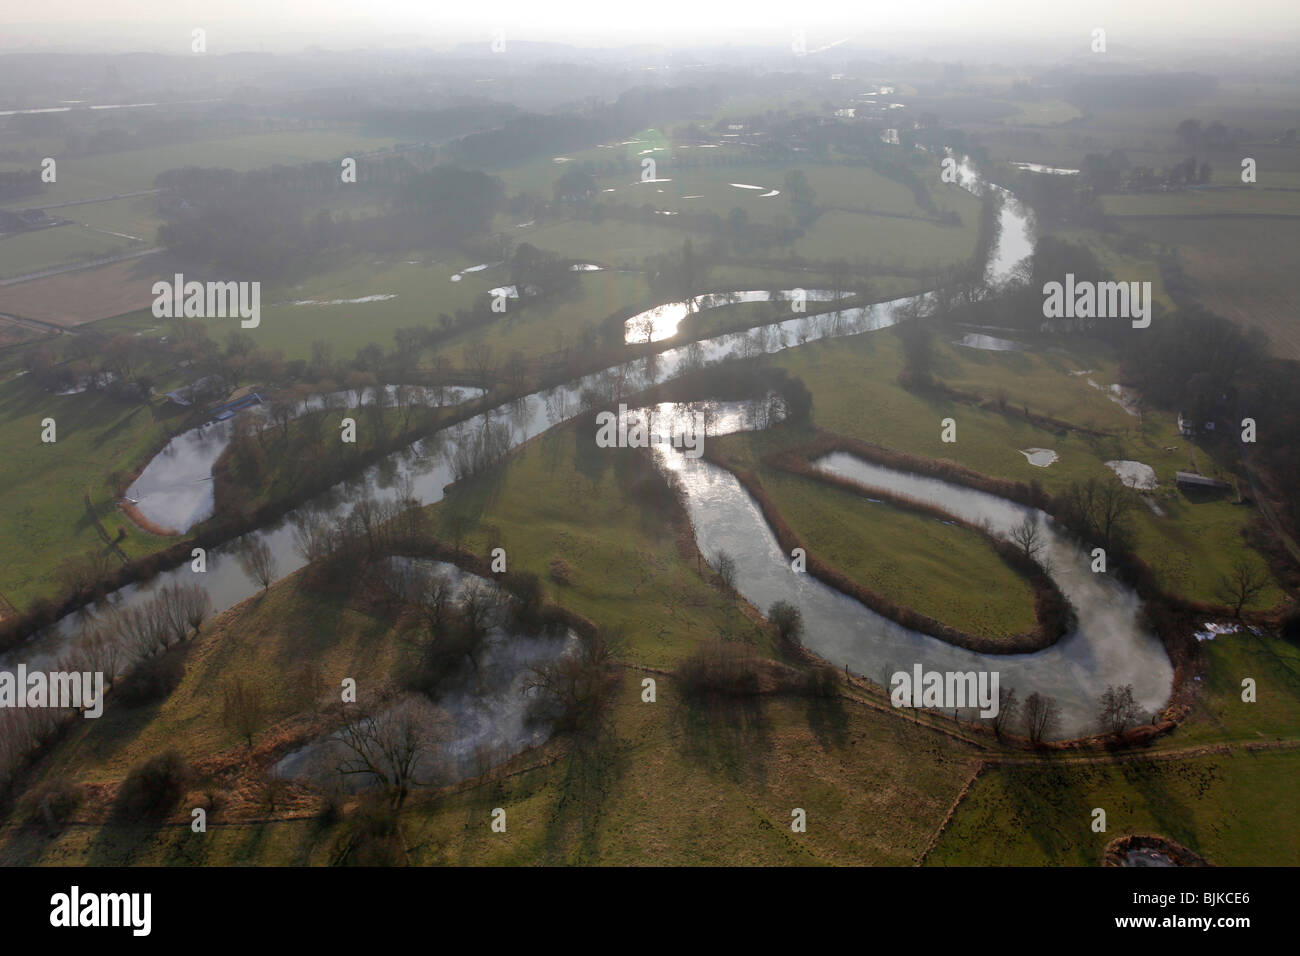 Aerial photo, Lippe River, Lippe meander and meadows, Luenen city limits, Bergkamen, Ruhr area, North Rhine-Westphalia, Germany Stock Photo